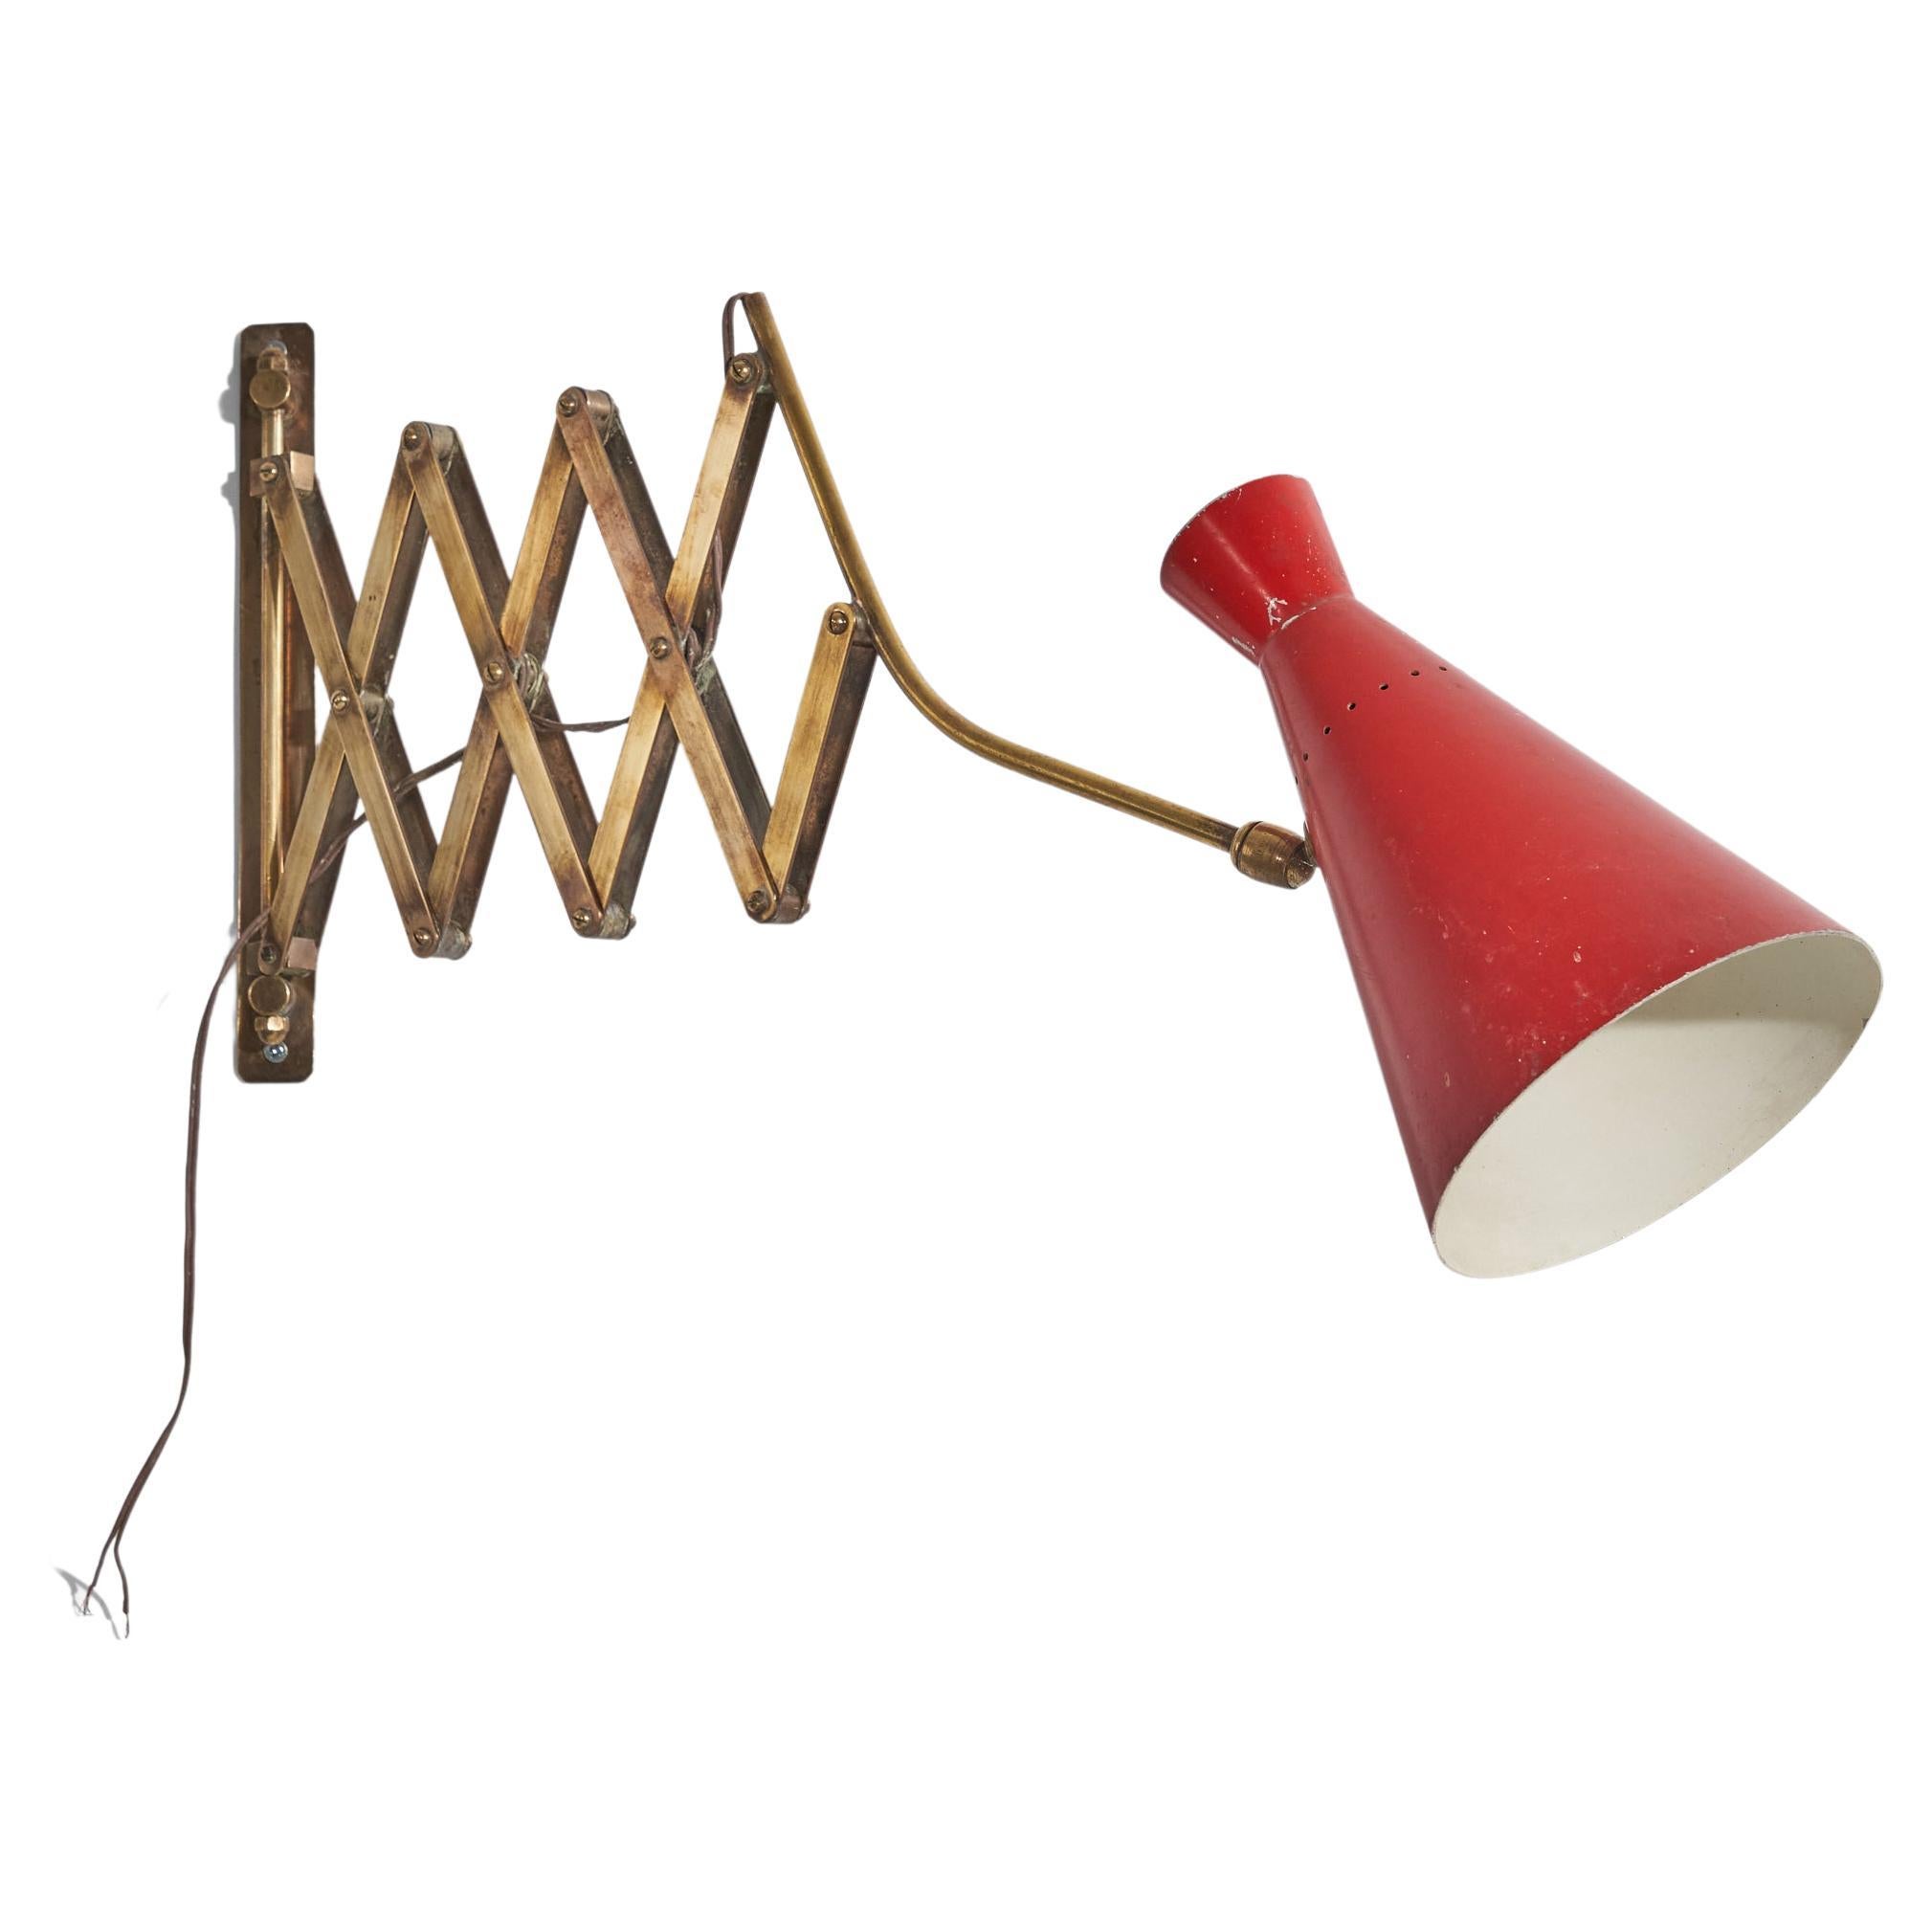 Italian, Adjustable Wall Light, Brass, Red Lacquered Metal, Italy, 1940s